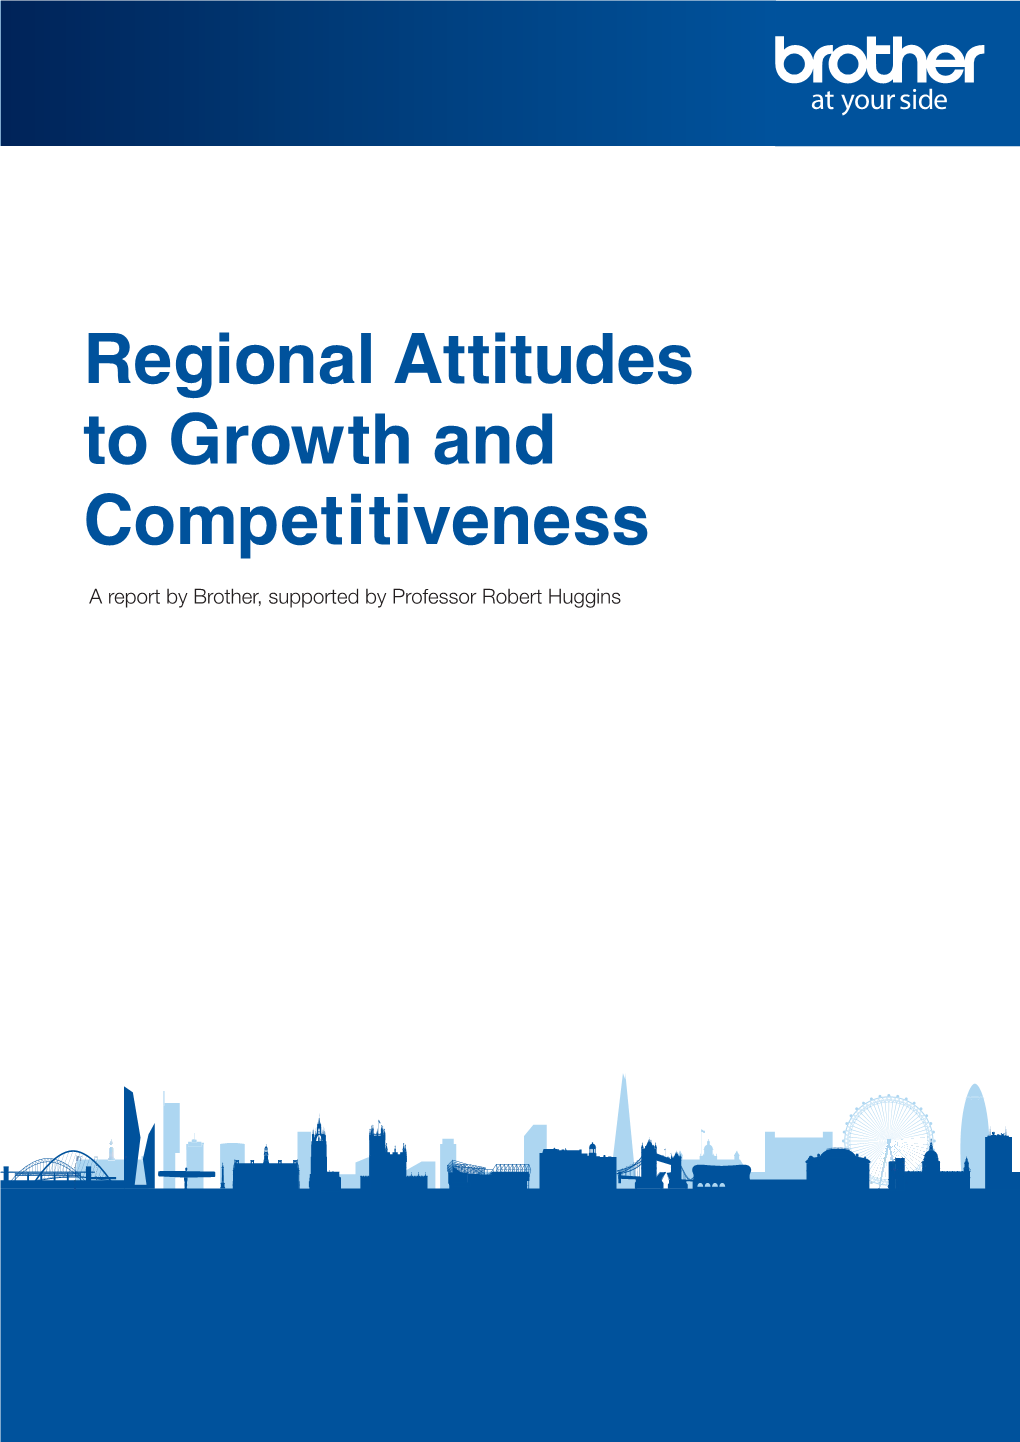 Regional Attitudes to Growth and Competitiveness a Report by Brother, Supported by Professor Robert Huggins 2 | About Brother